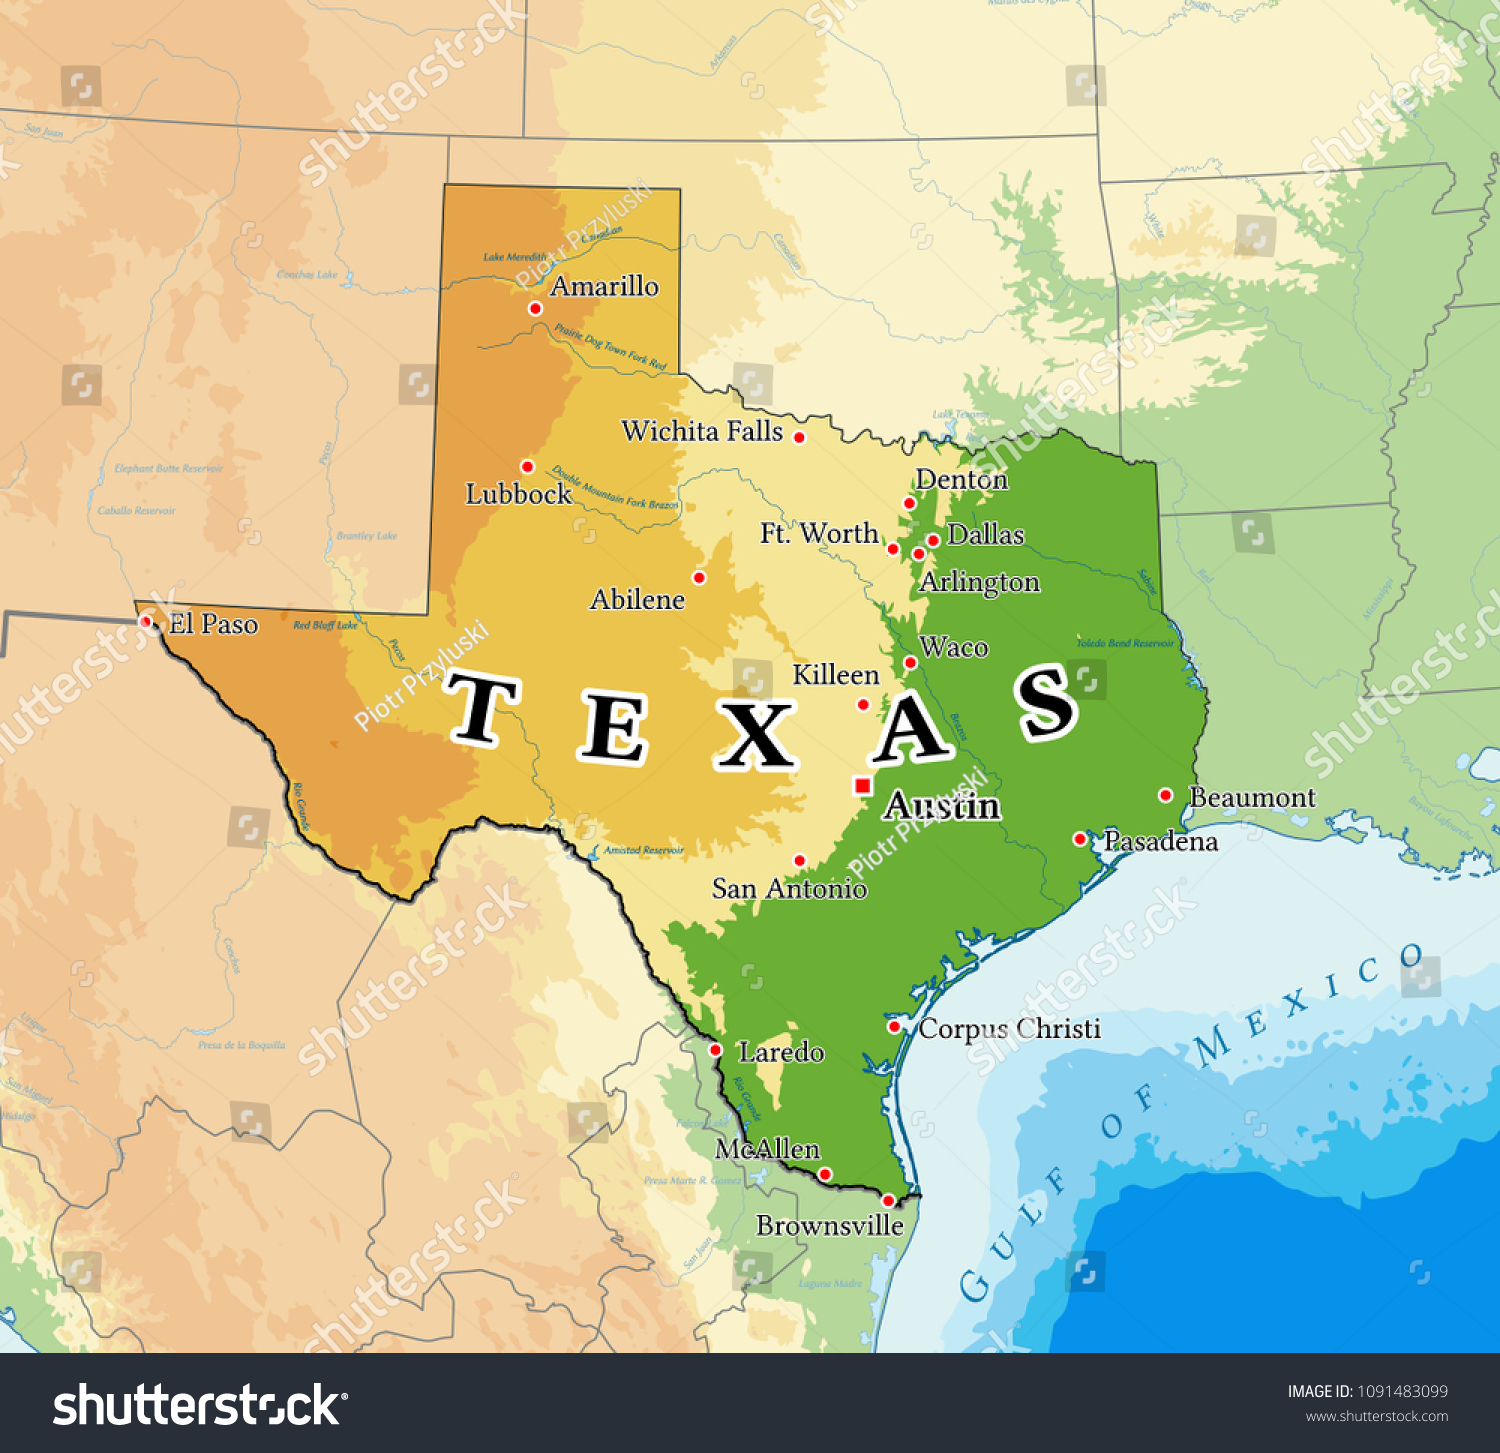 Texas Physical Map Elements Of Image Furnished Royalty Free Stock Vector 1091483099 9899